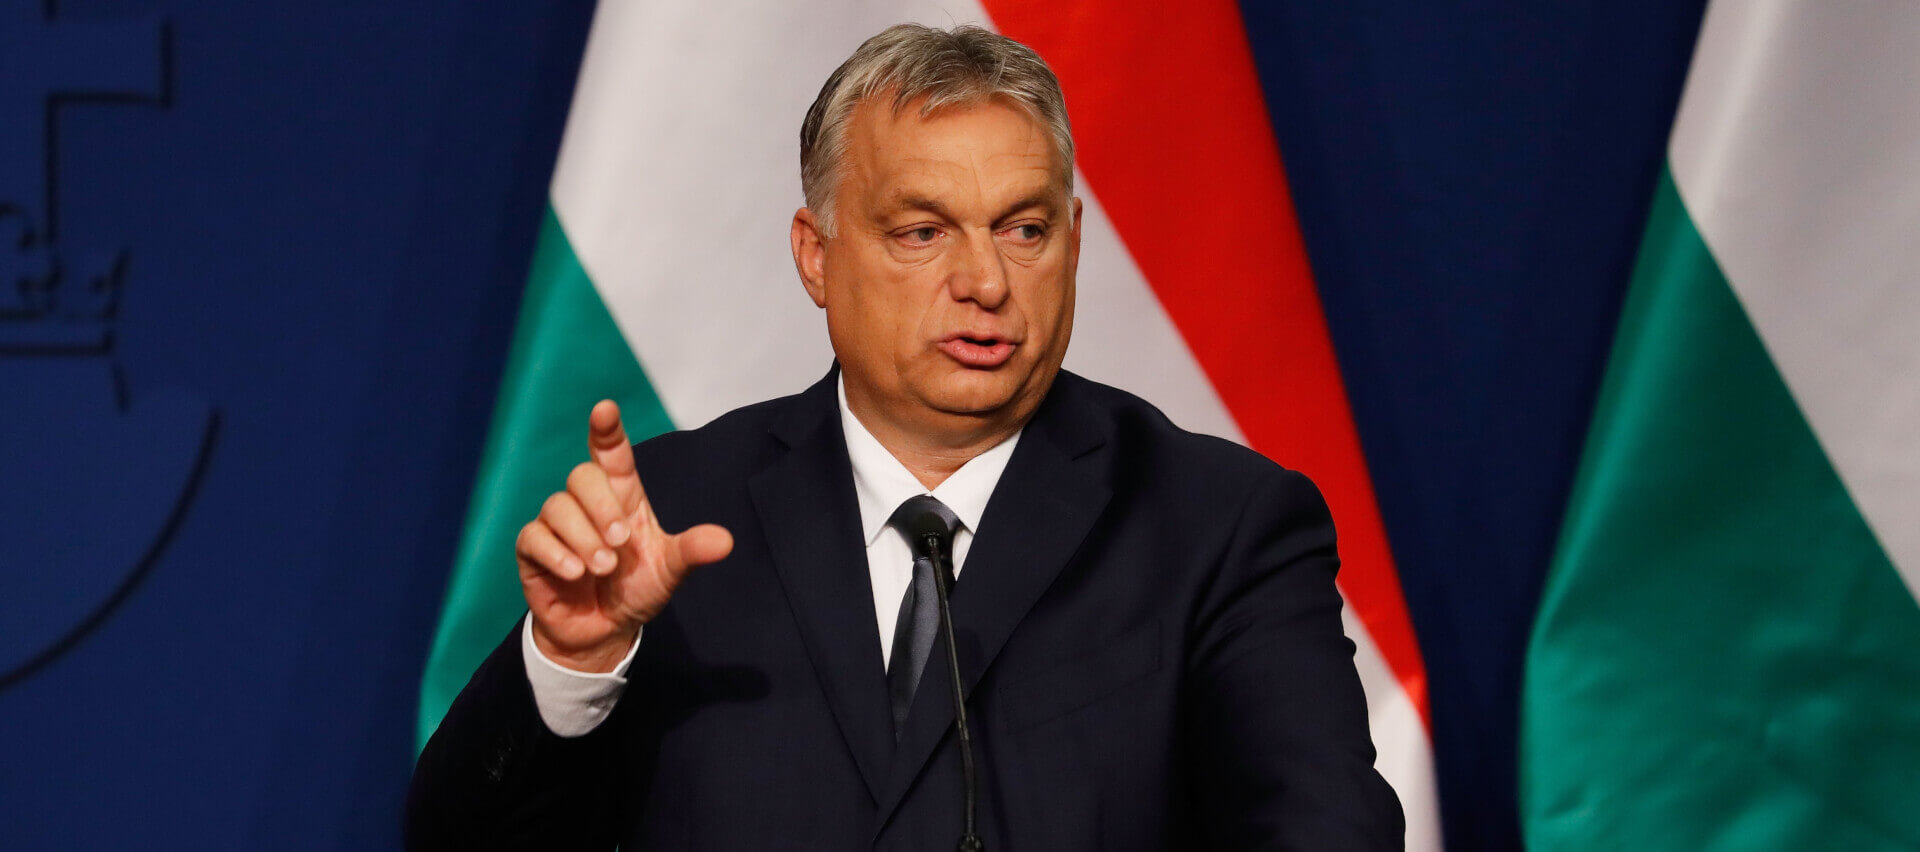 Hungary Ends Legal Recognition of Transgender People